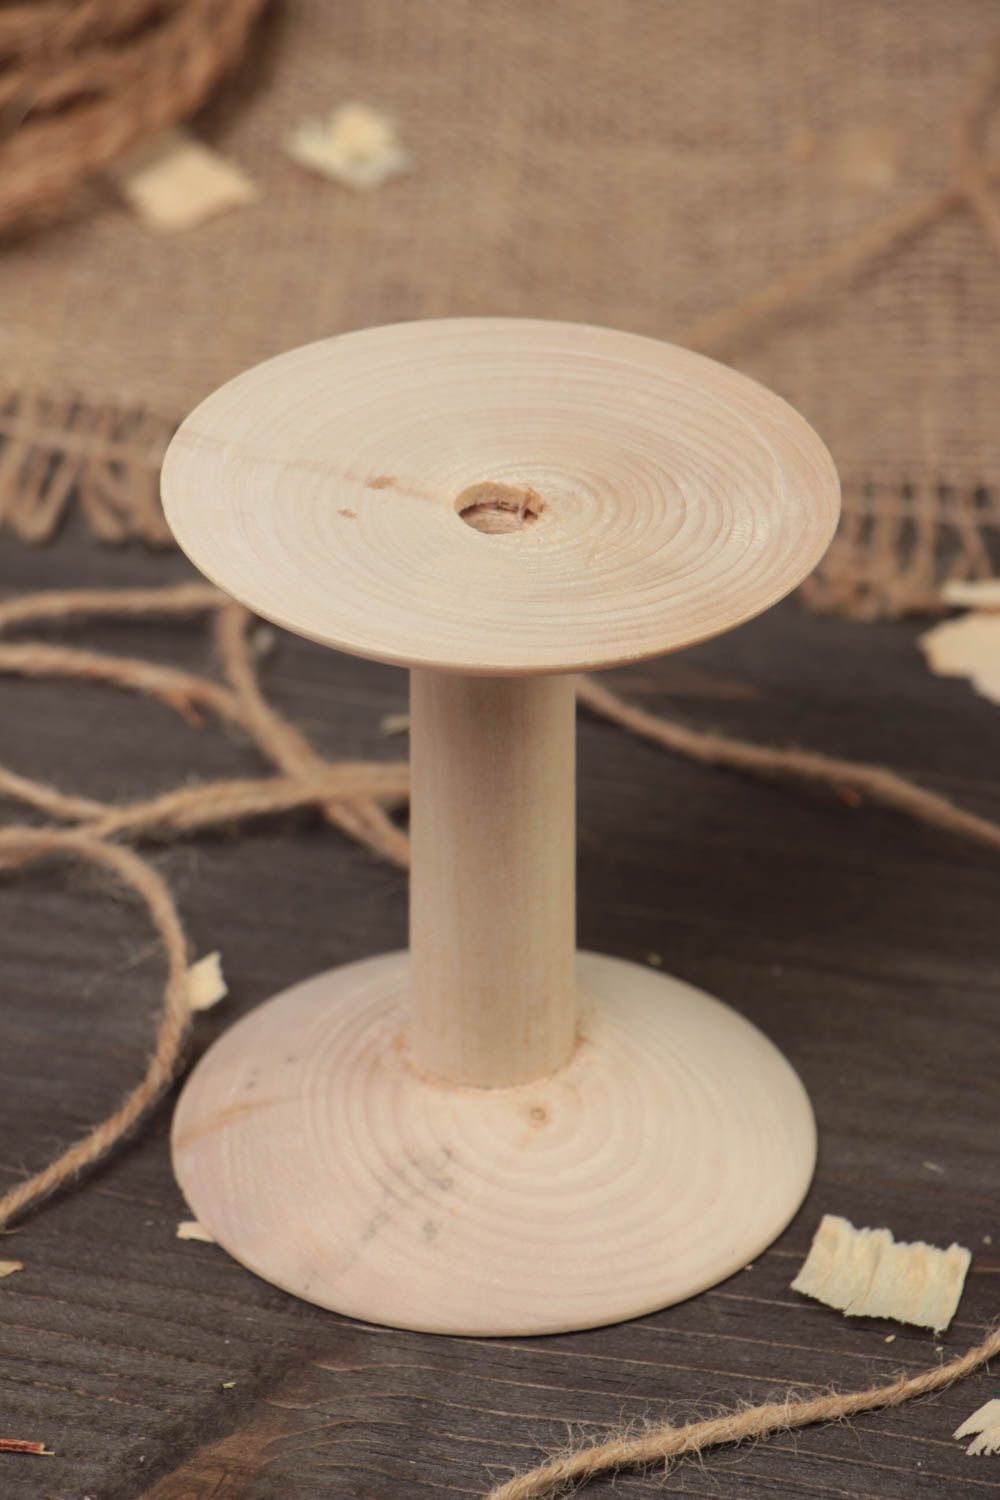 Handmade wooden craft blank for decoupage or painting spool for lace or ribbons photo 1